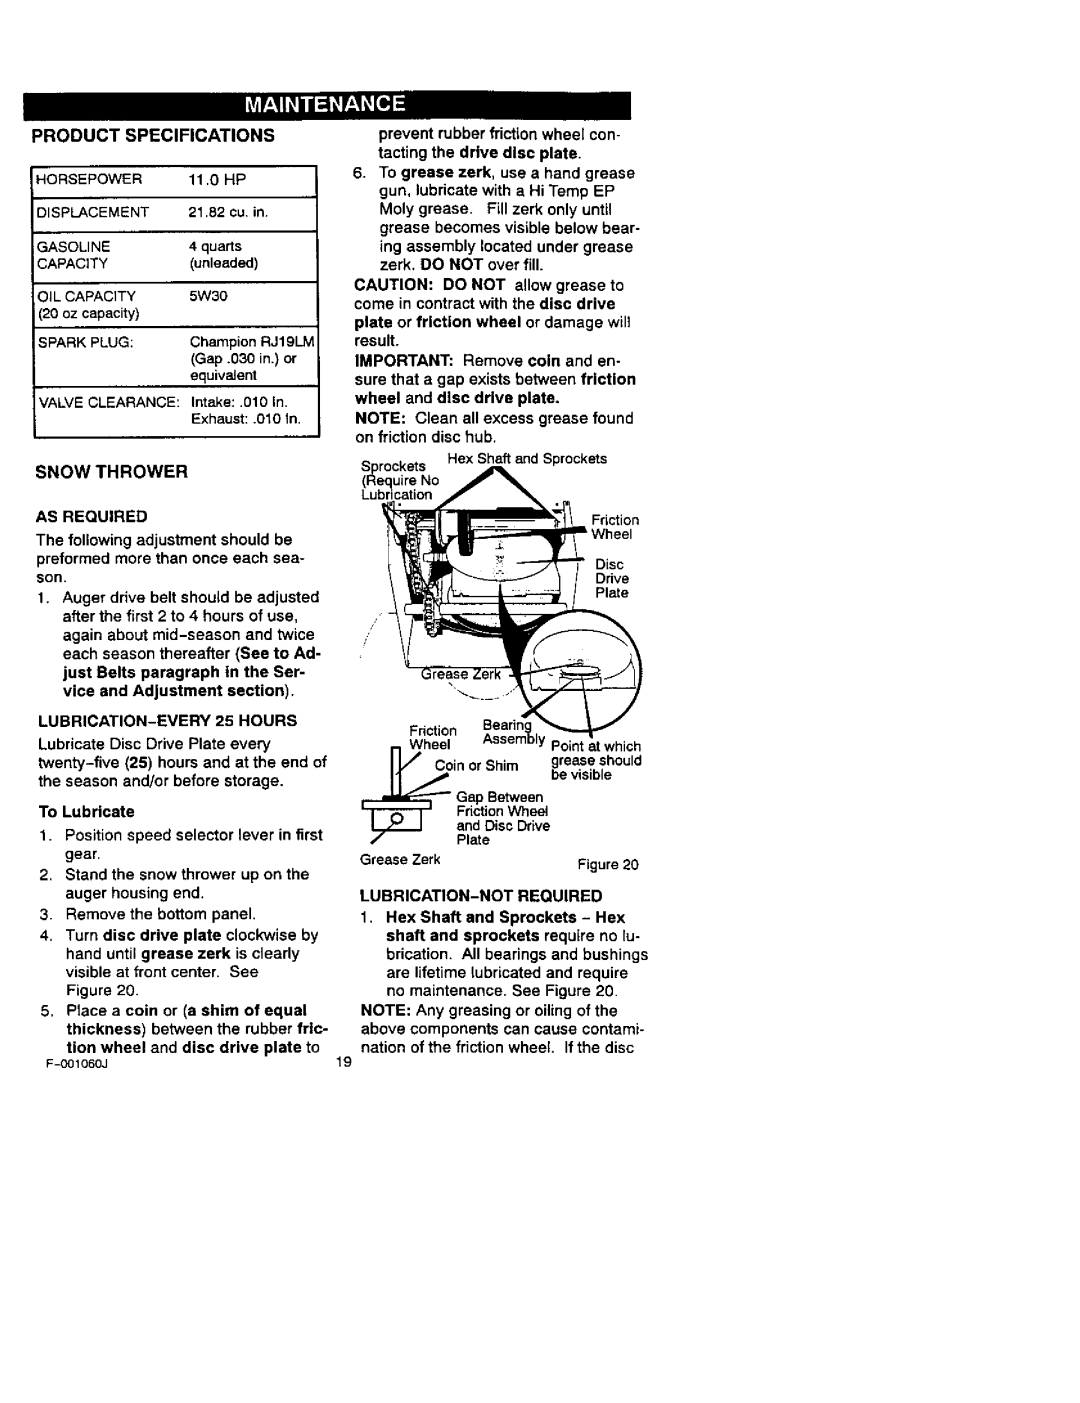 Craftsman 536.88113 operating instructions Product Specifications, Snow Thrower, AS Required, LUBRICATION-EVERY 25 Hours 